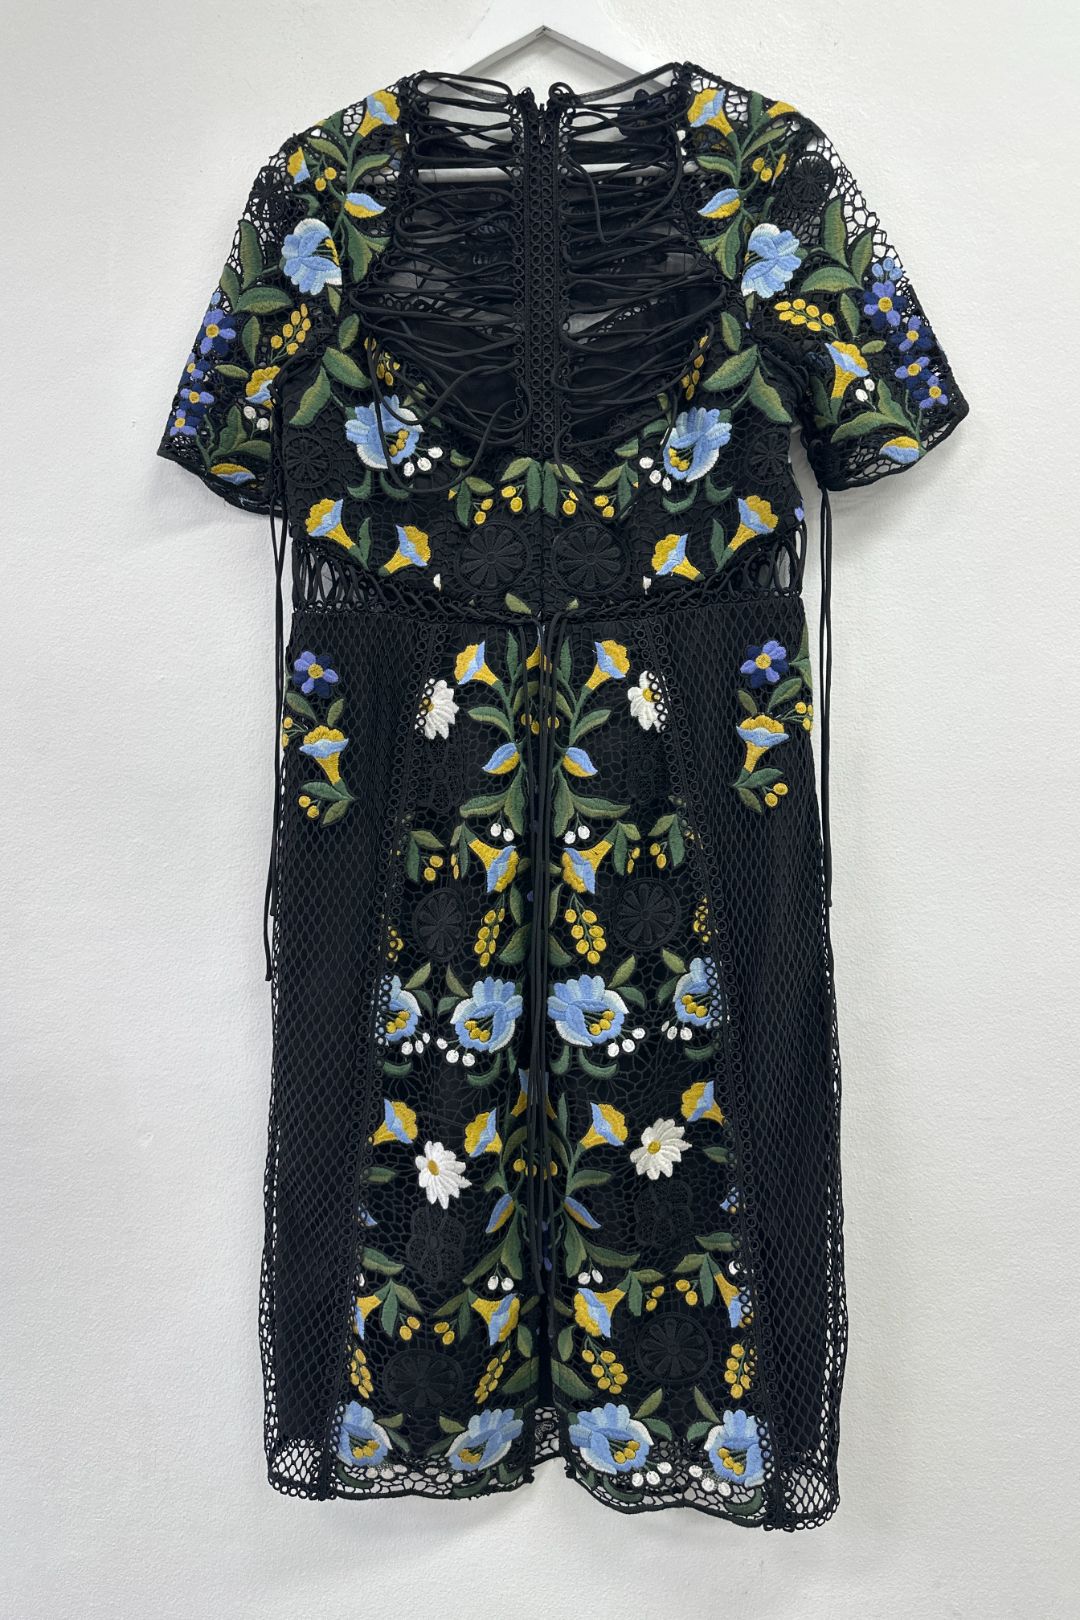 Thurley Floral Embroidered Vasette Lace Dress